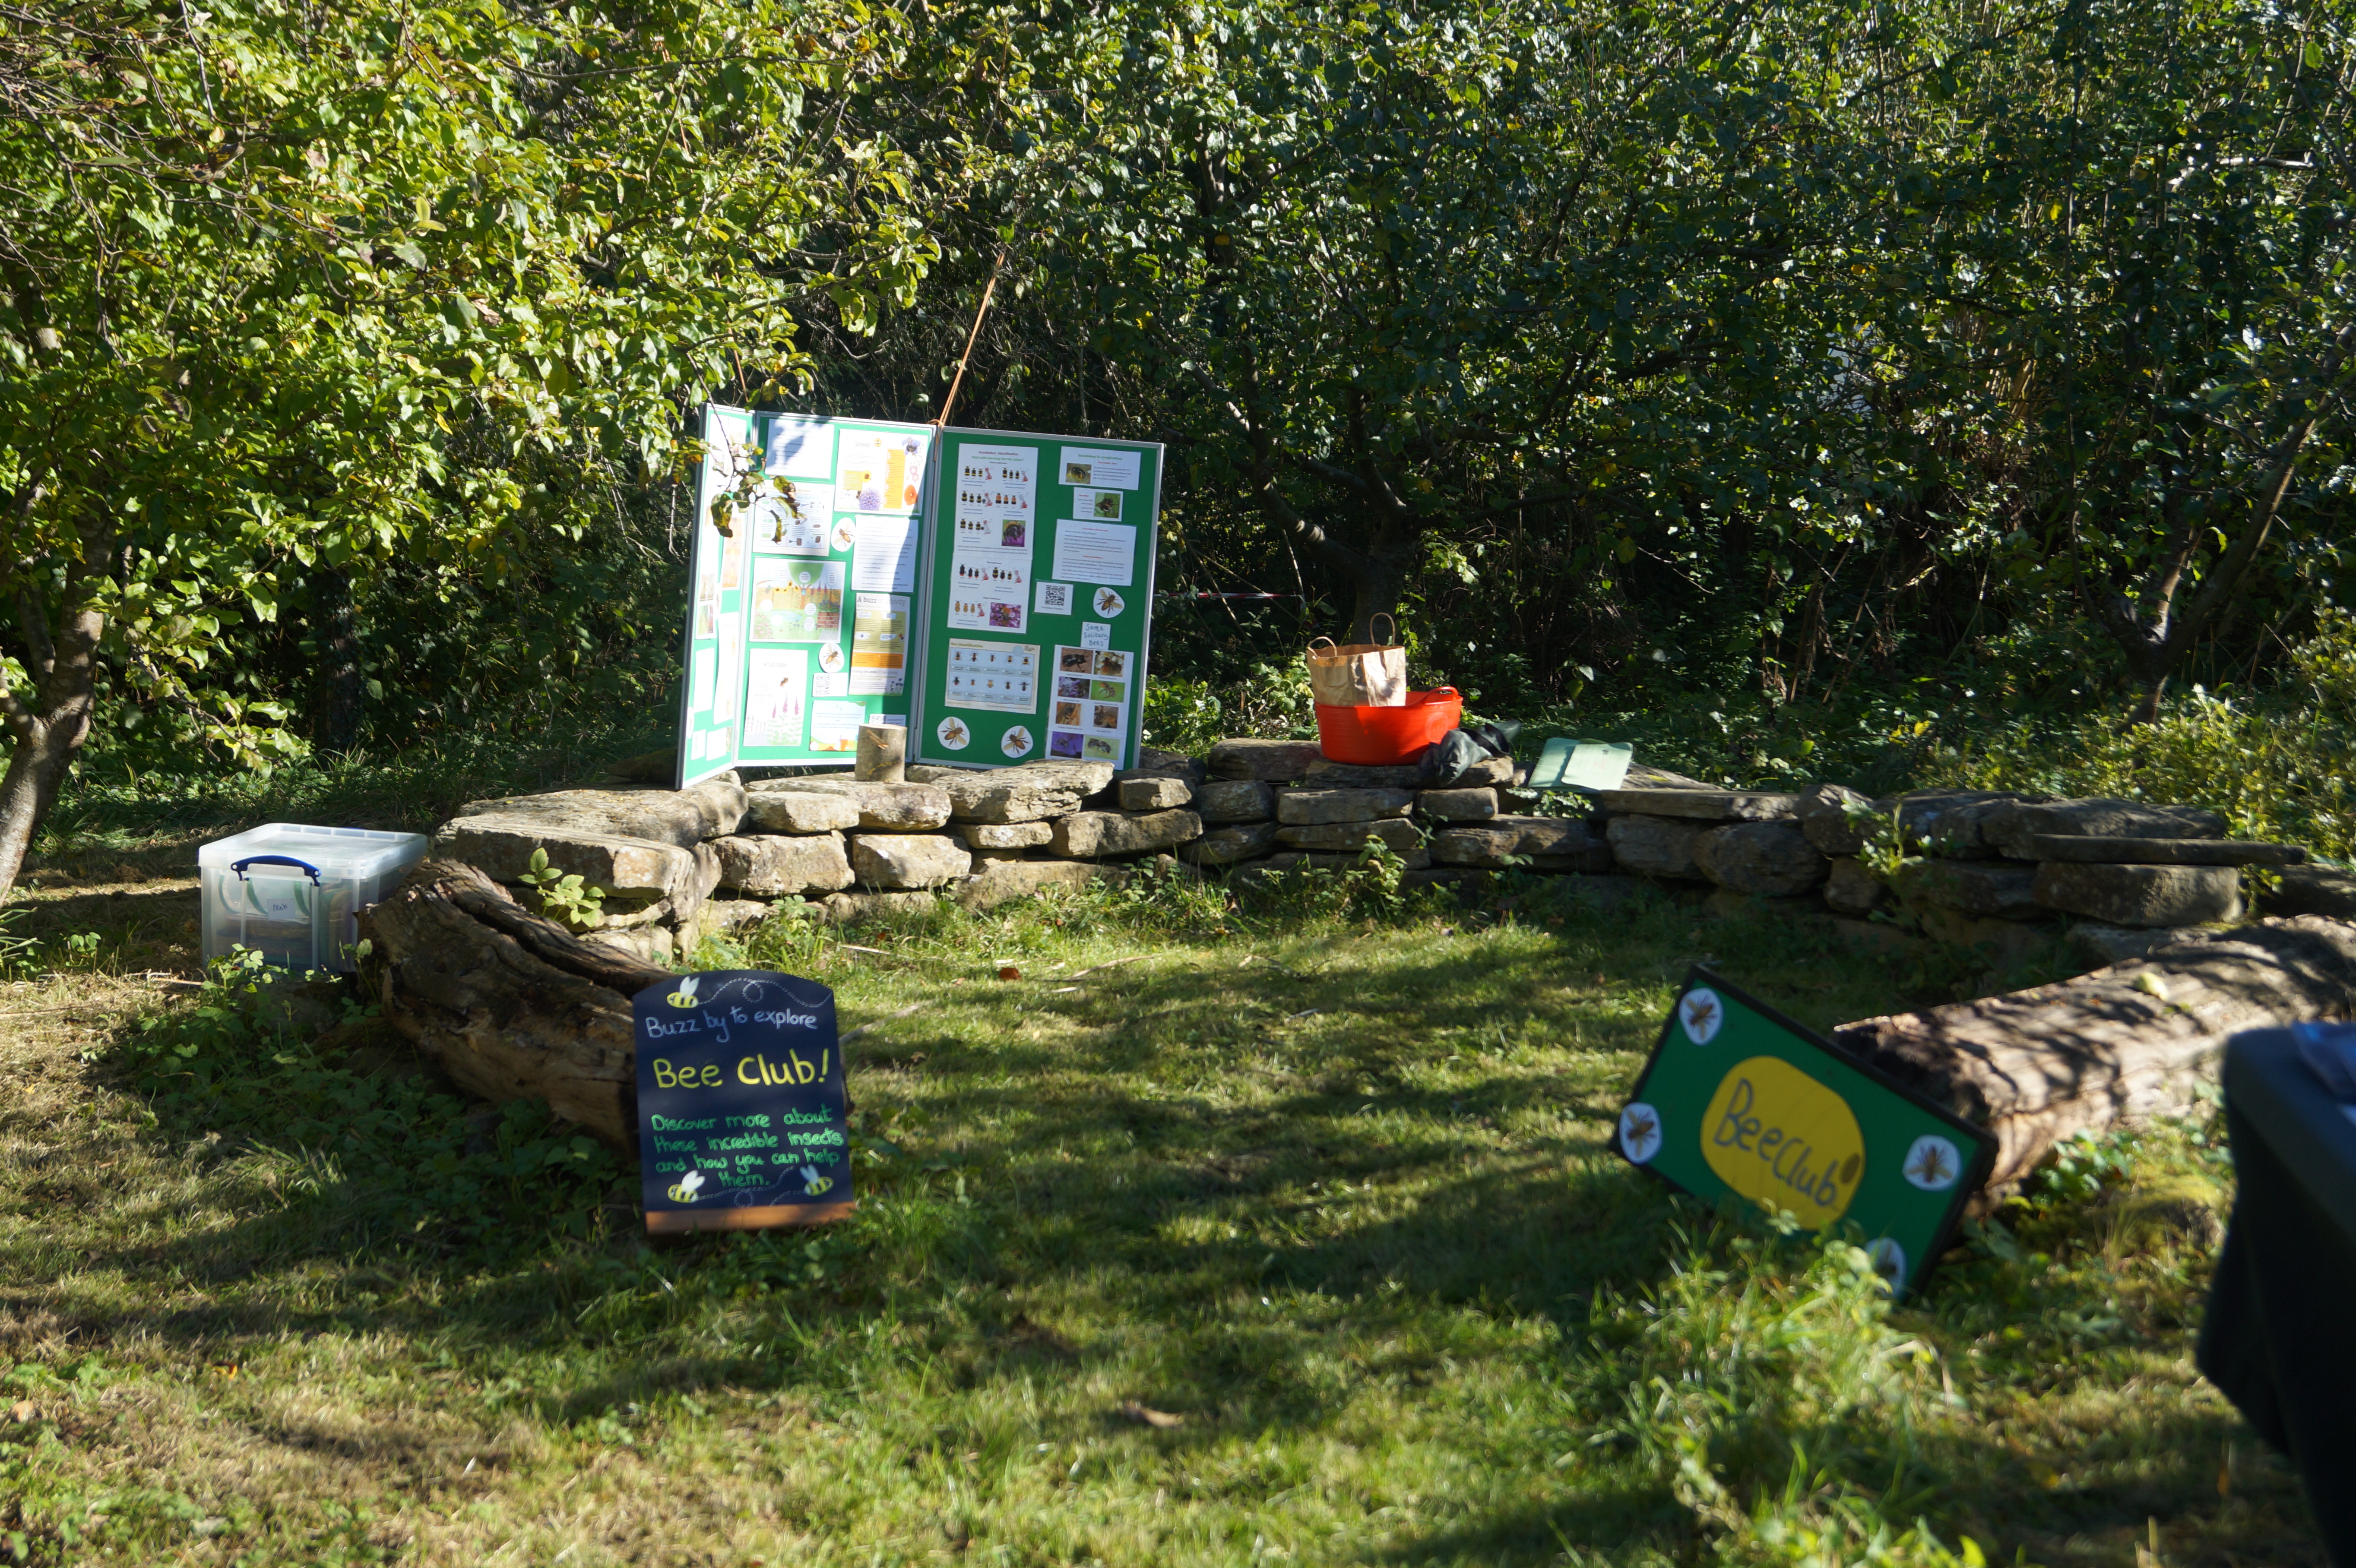 Stone bench surrounded by trees with info board and signs for Bee Club